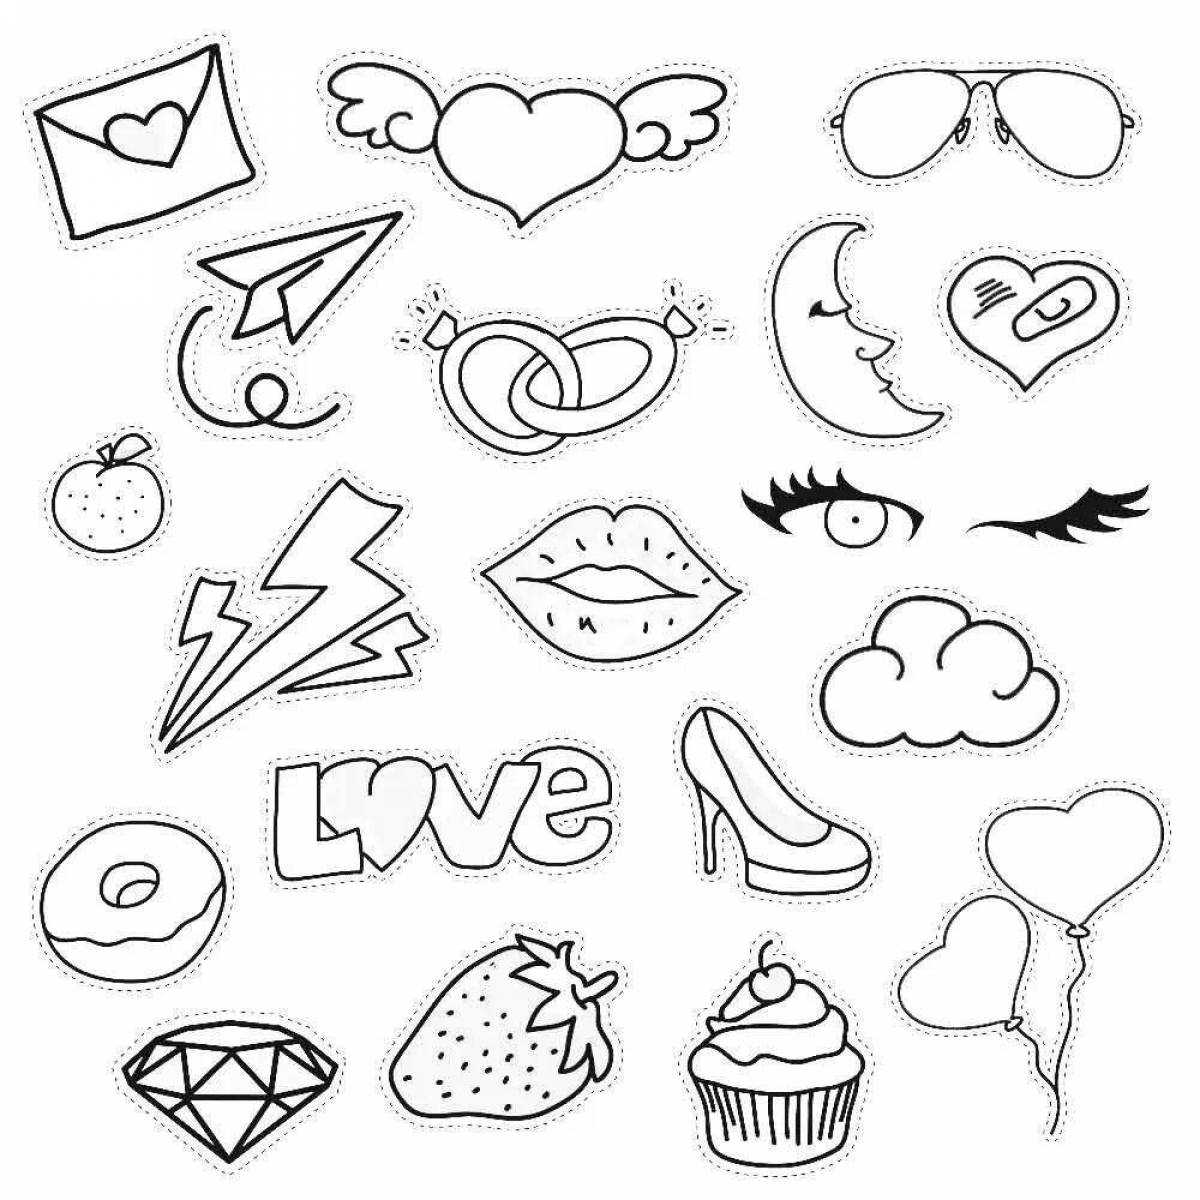 Luminous coloring pages small pictures